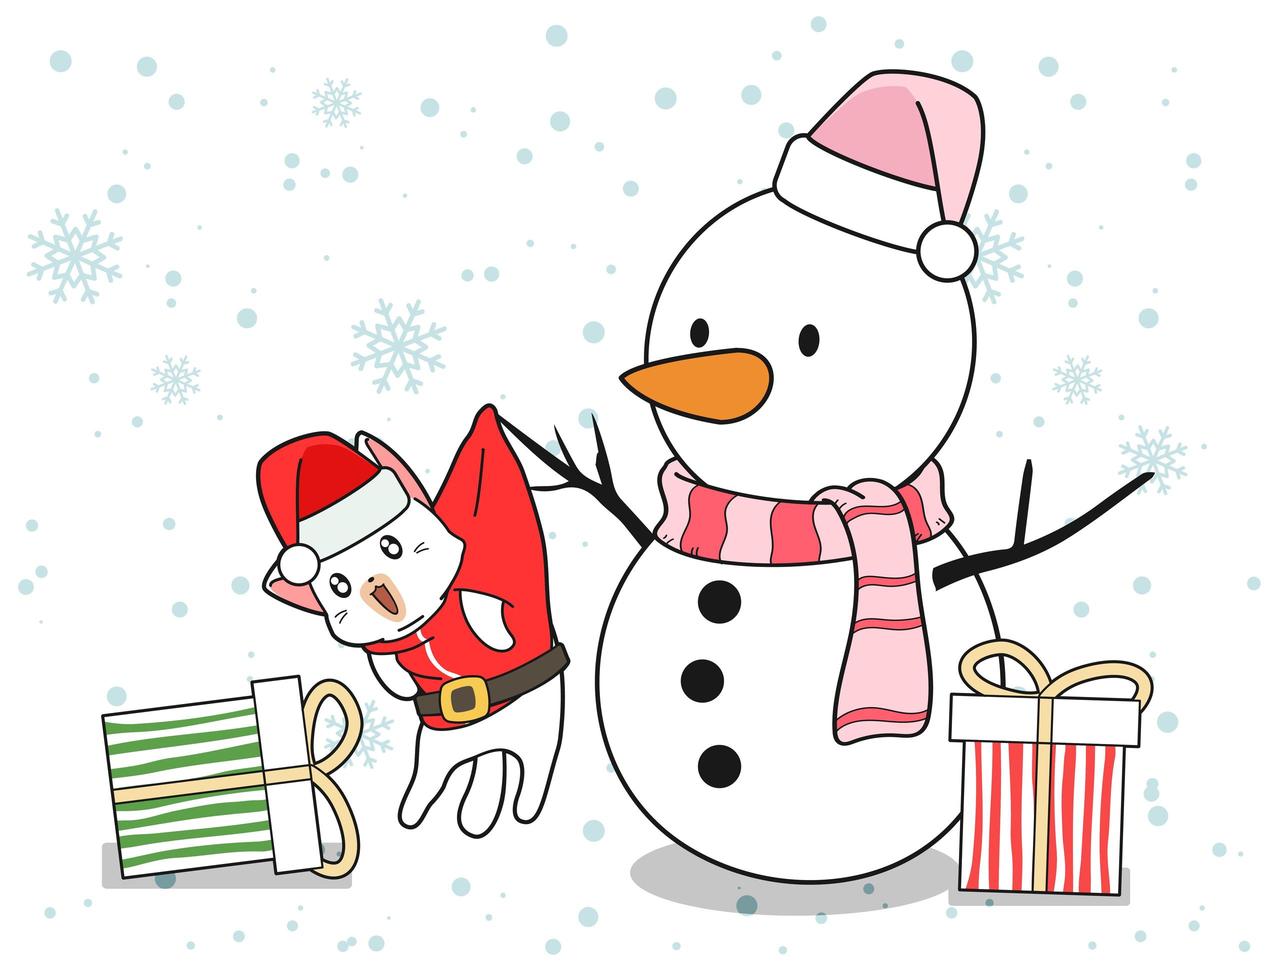 Snowman and Santa Cat with Gifts vector